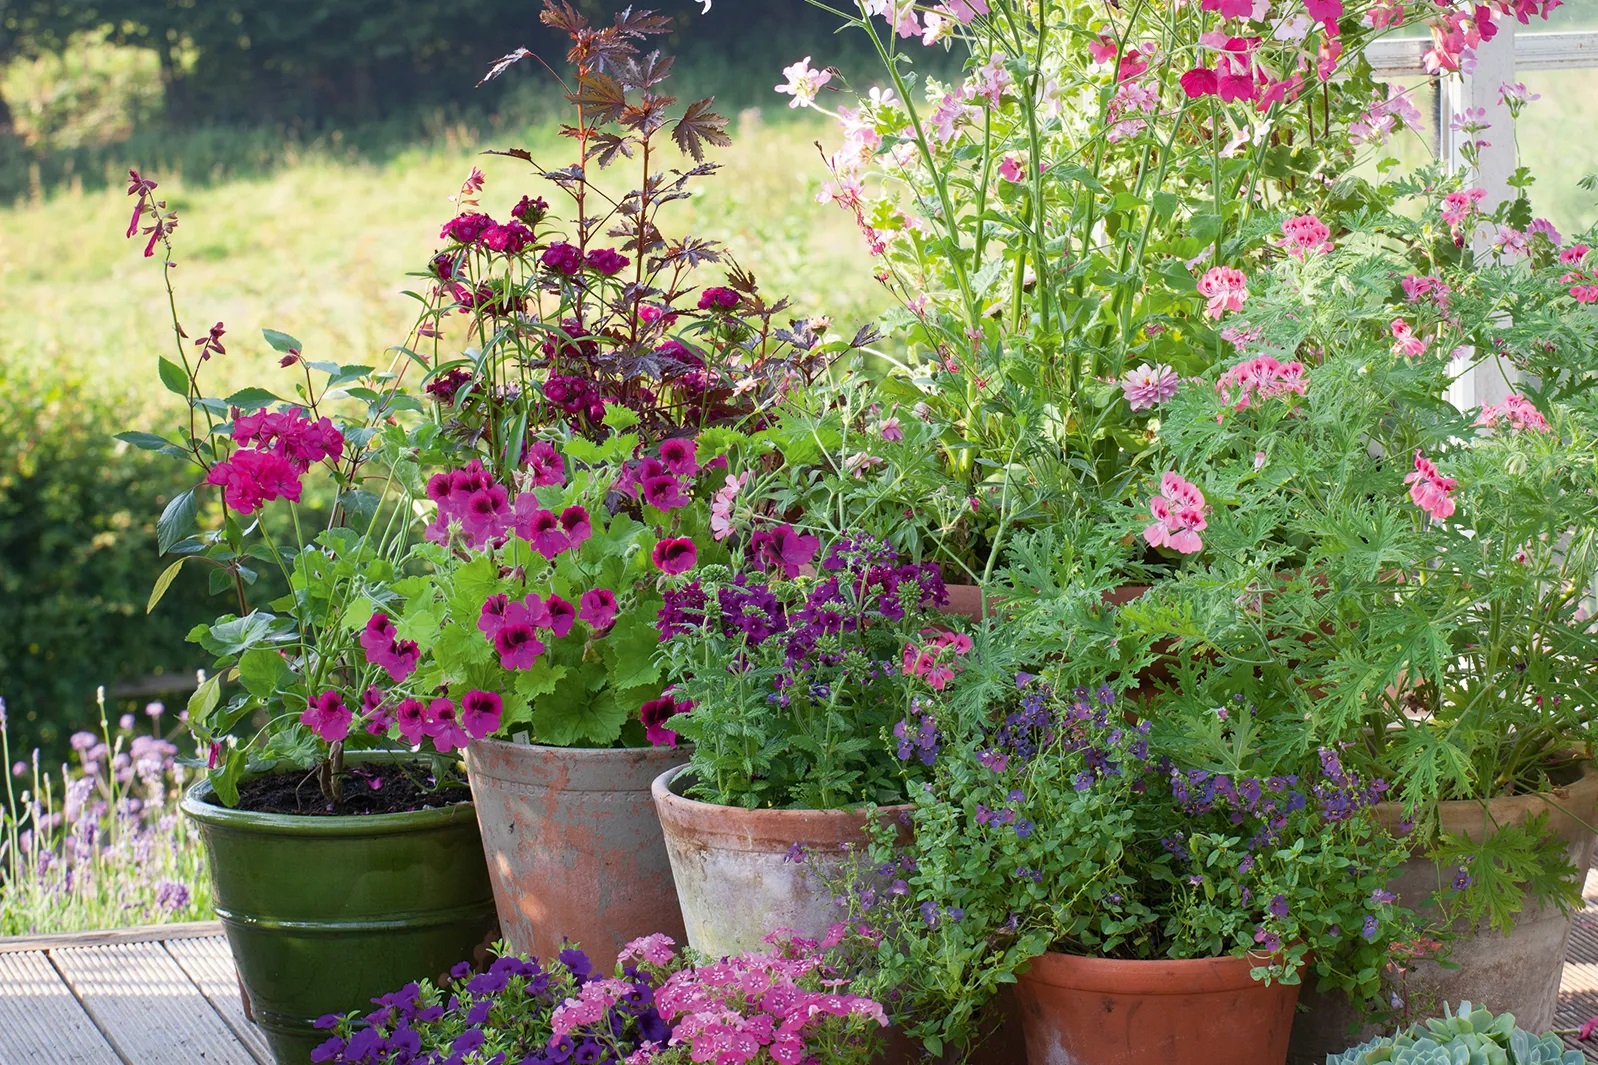 Bulk-Buy Brilliance: The Gardener’s Guide to Wholesale Nursery Containers